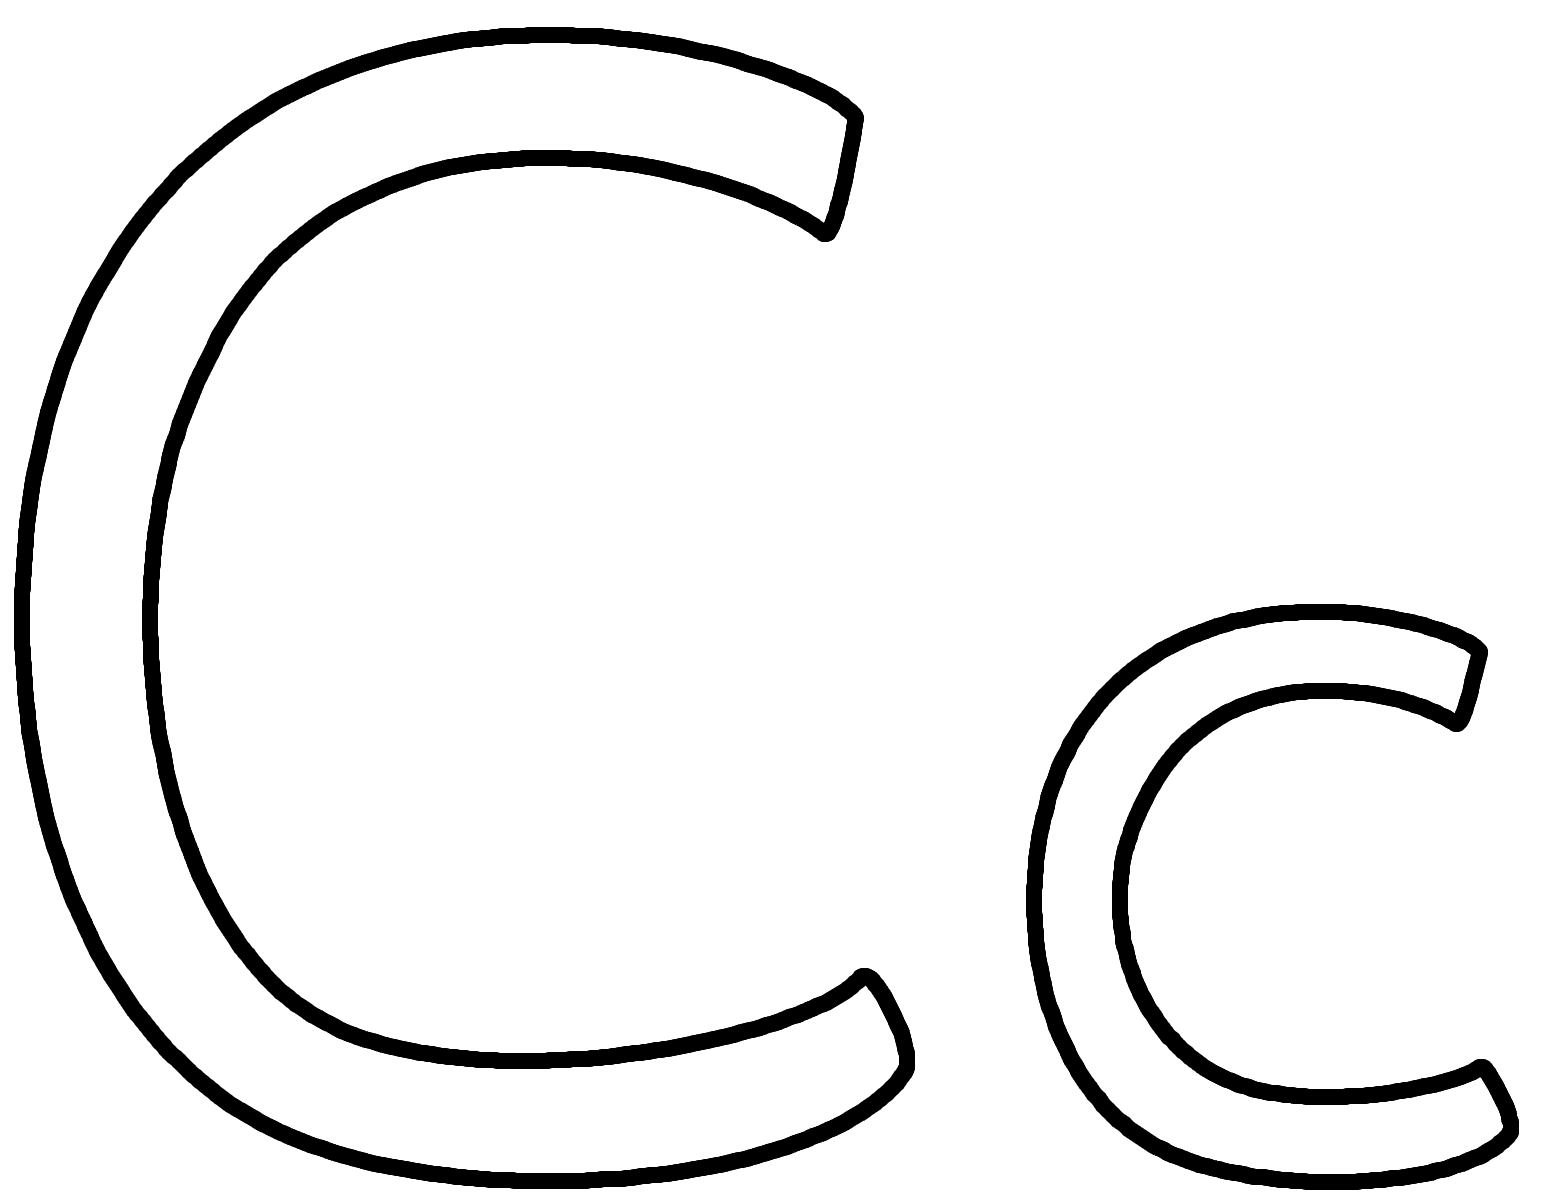 Printable Letter C Template